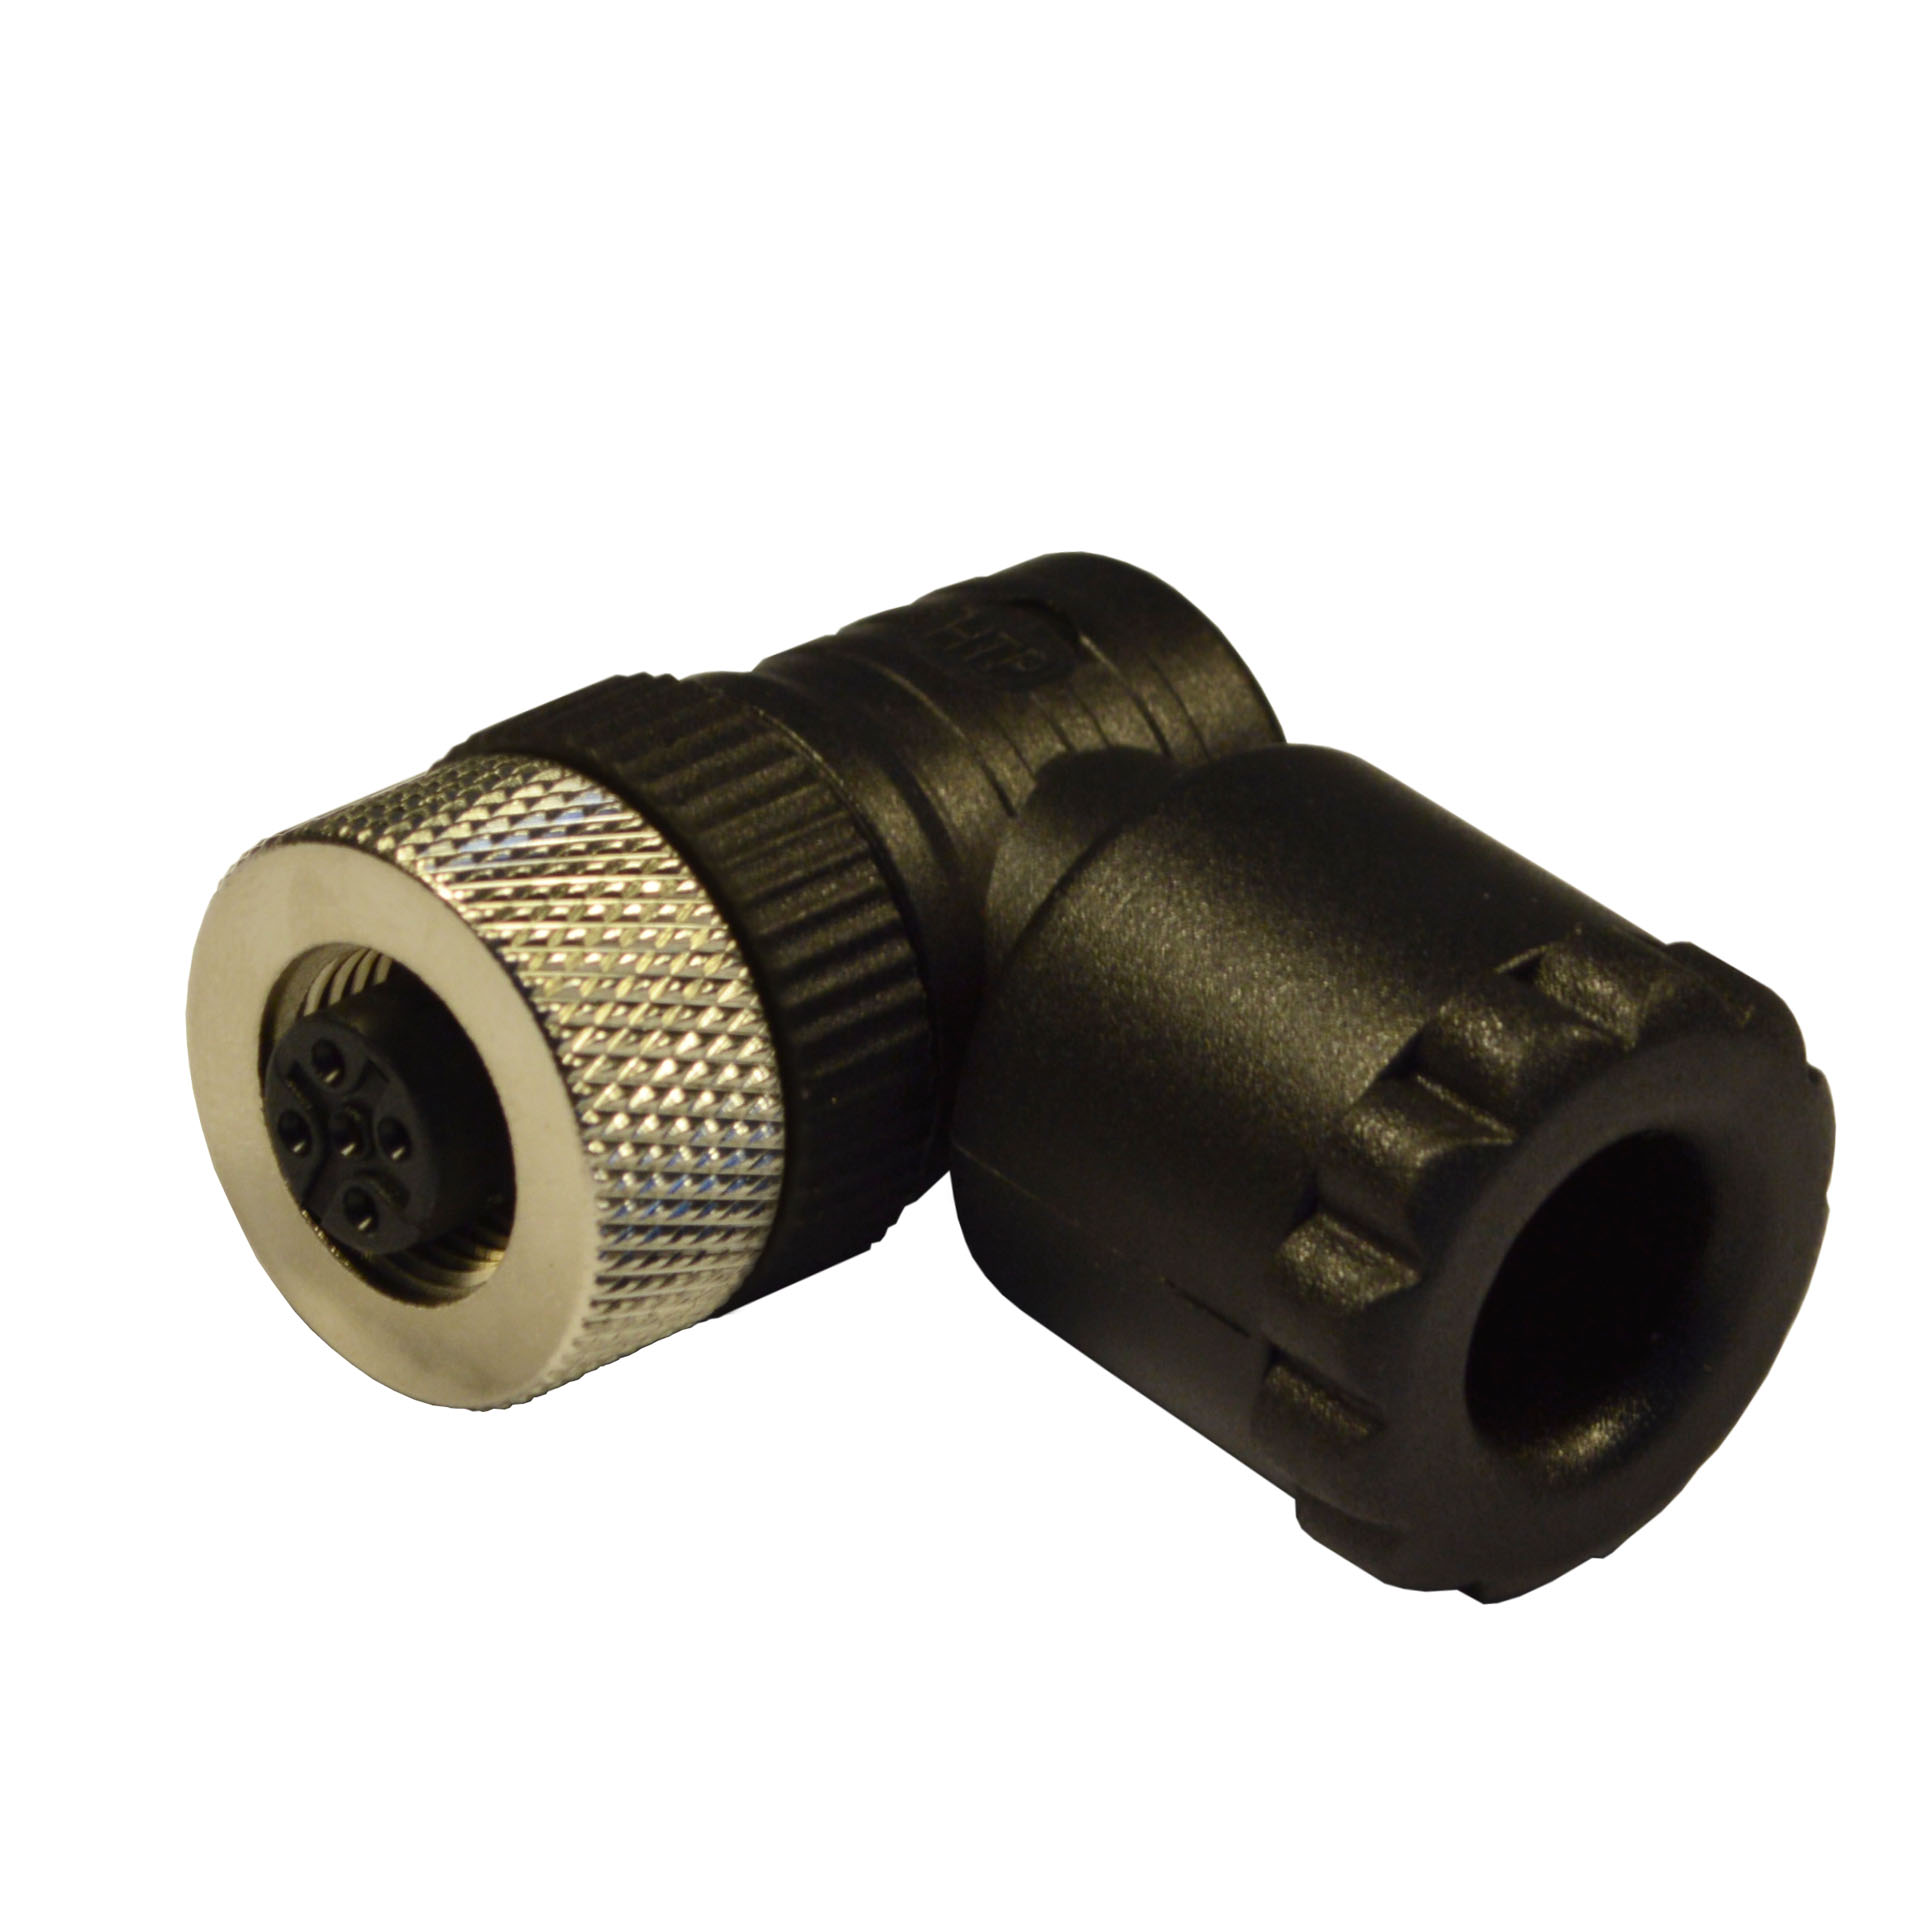 M12 field attachable,female,90°,4p.,PG9/11unif. or double exit cable,ATEX conform